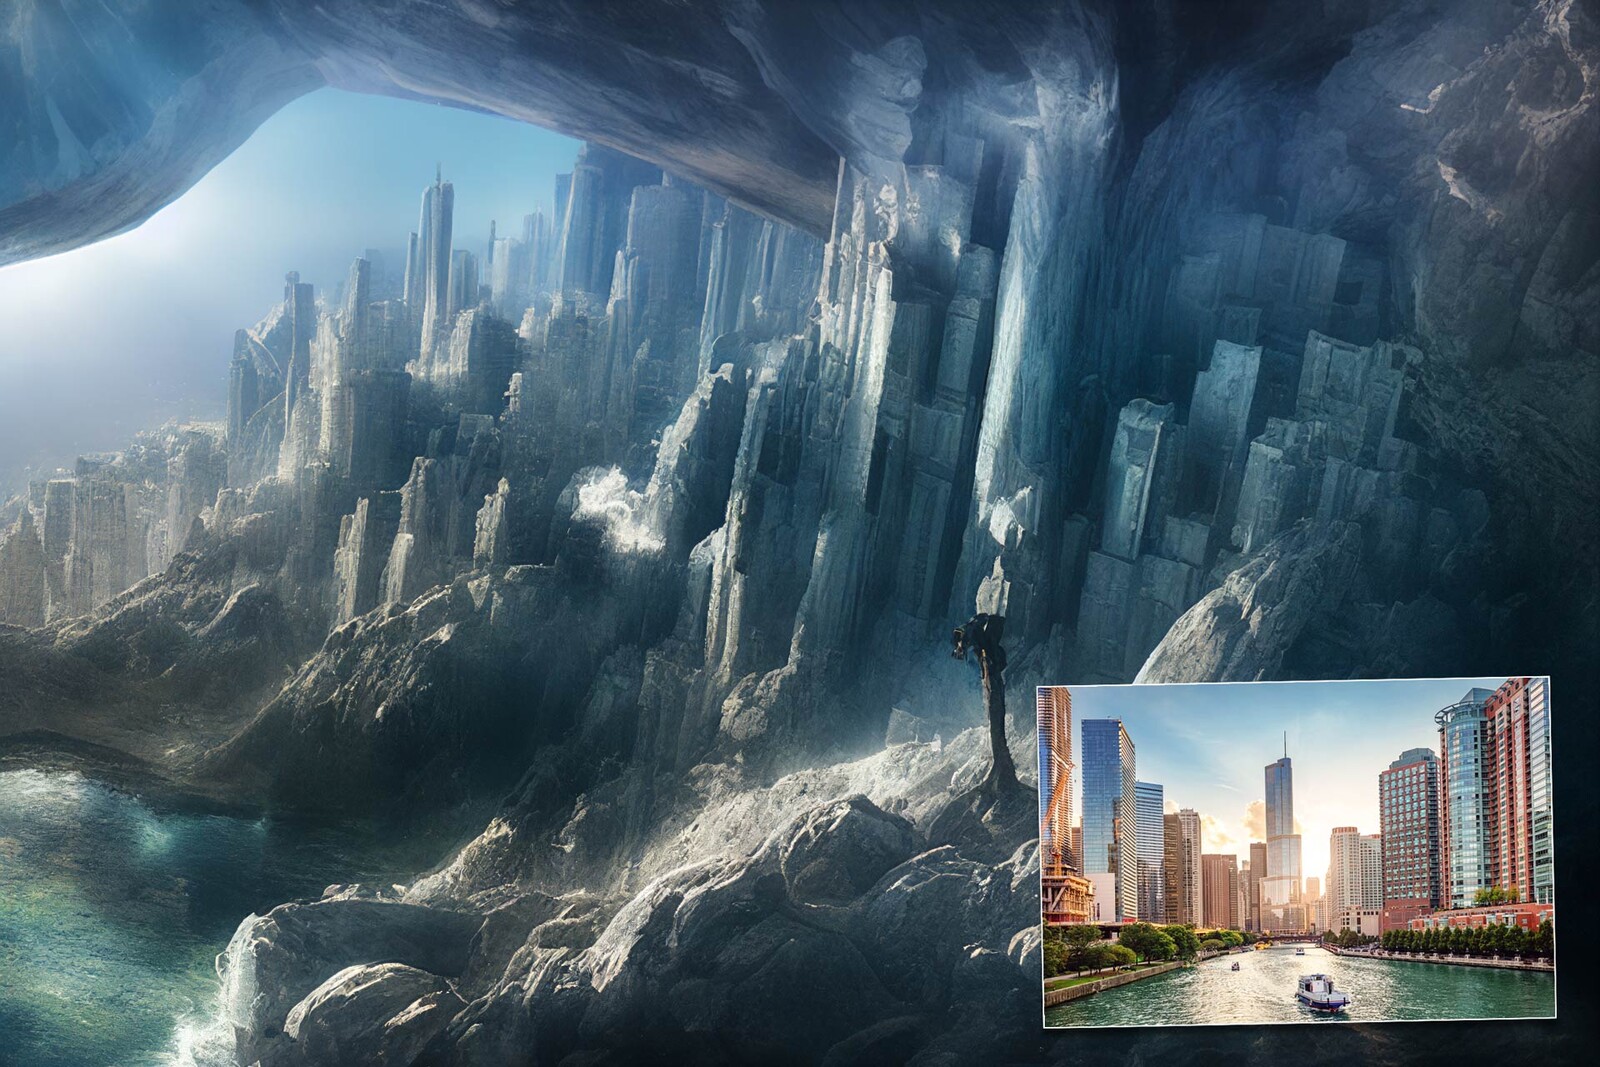 Text to Image: A city in the mountains inside a cliff based on a picture of Chicago.